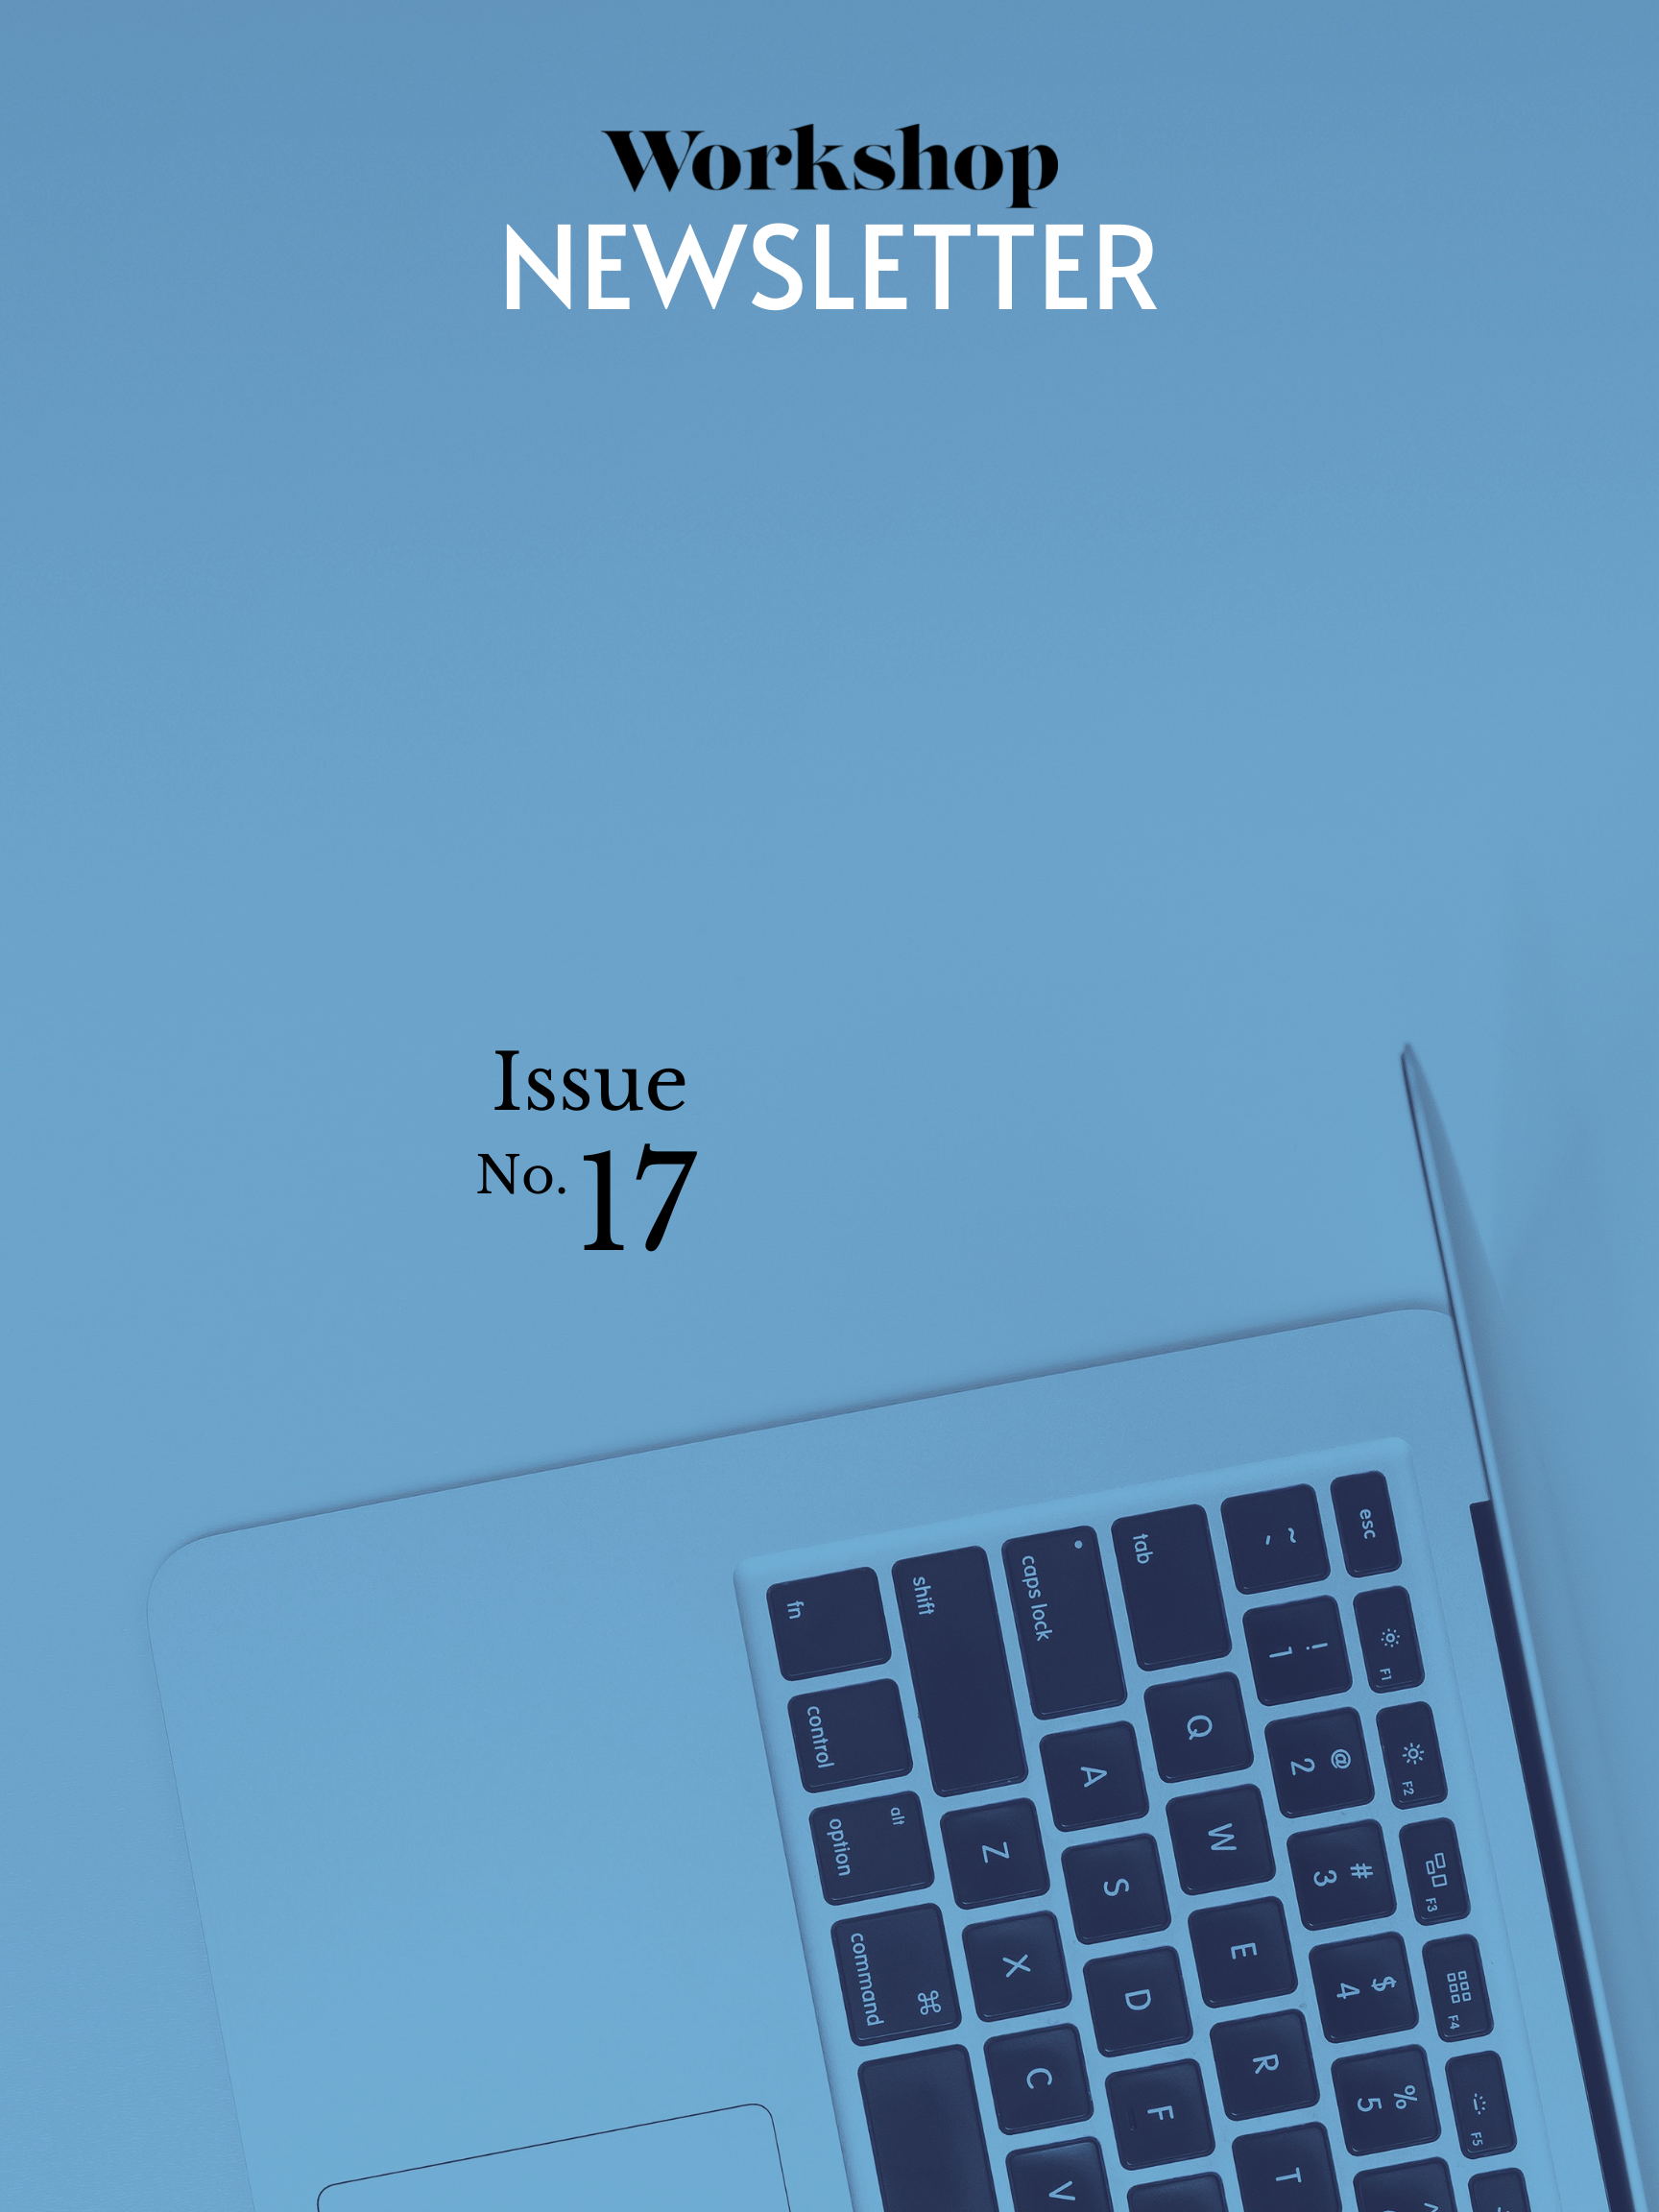 A laptop overlaid in blue with the words "Workshop Newsletter Issue No. 17"